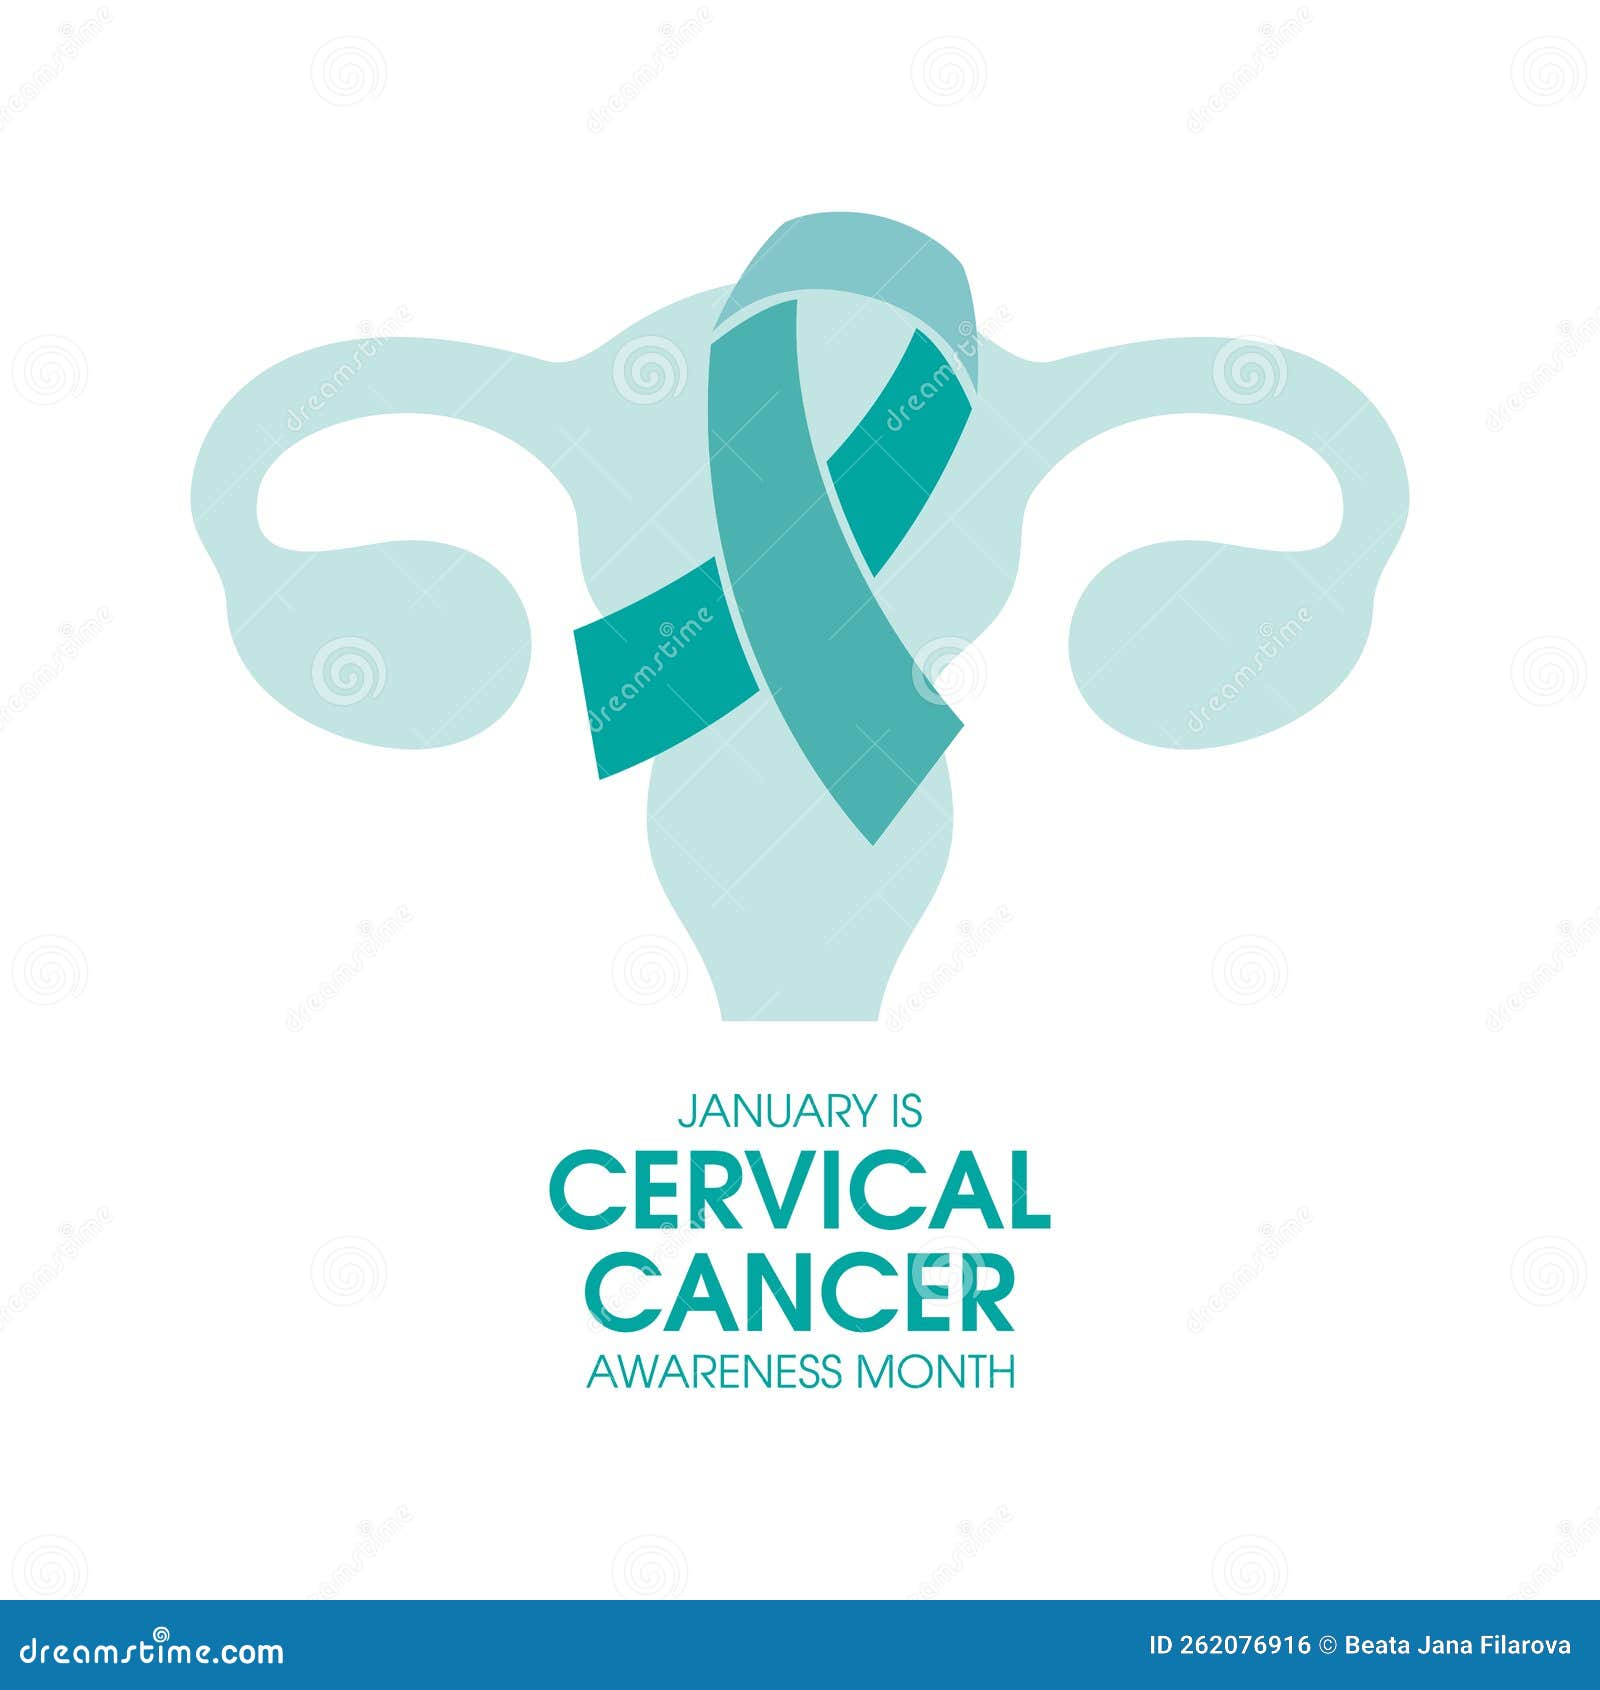 January is Cervical Cancer Awareness Month Vector Stock Vector ...